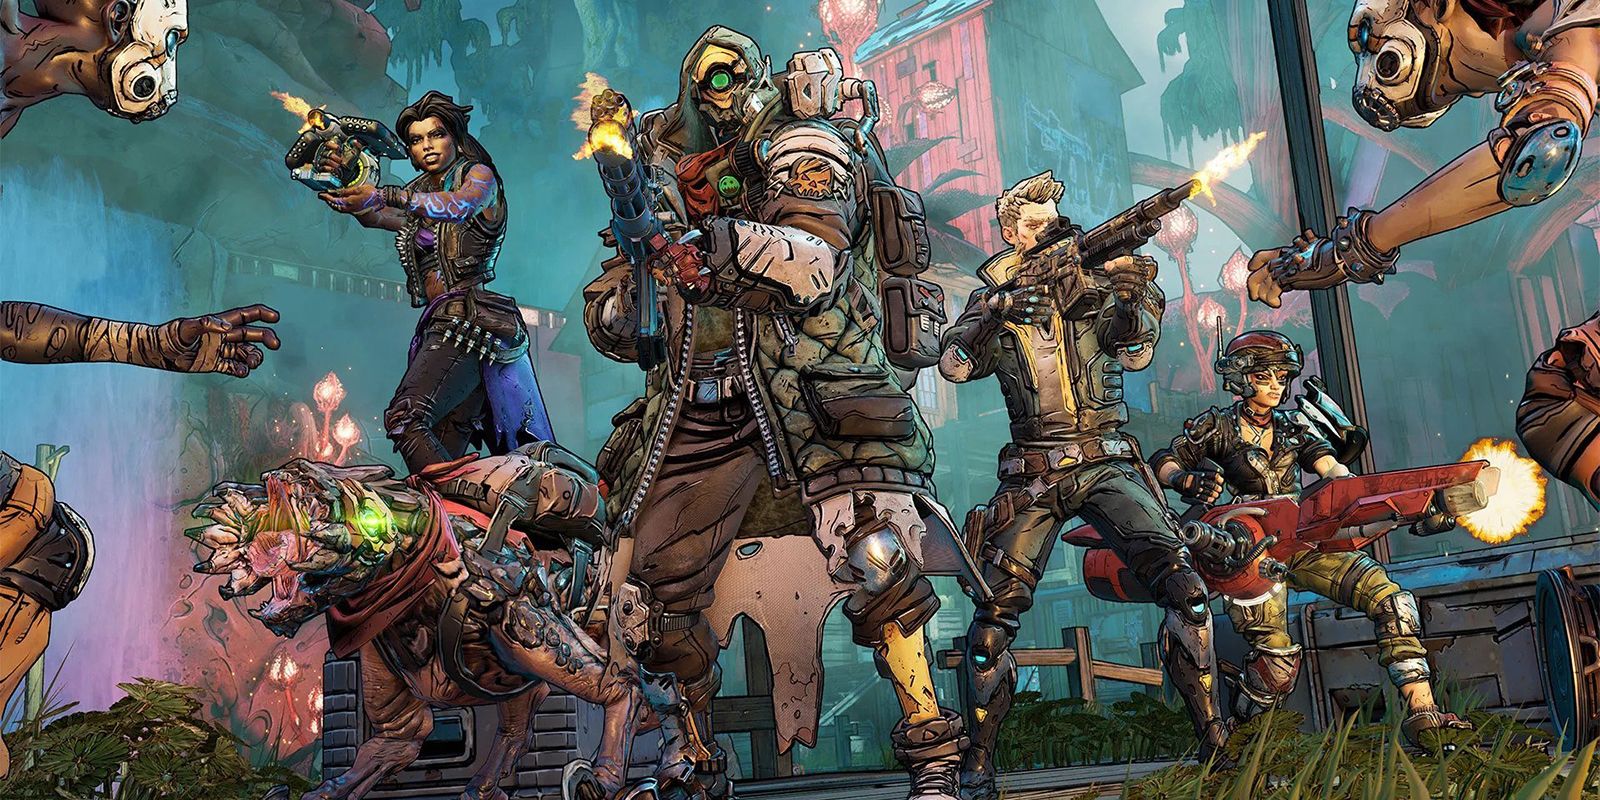 The cast of Borderlands 3 shooting guns at enemies